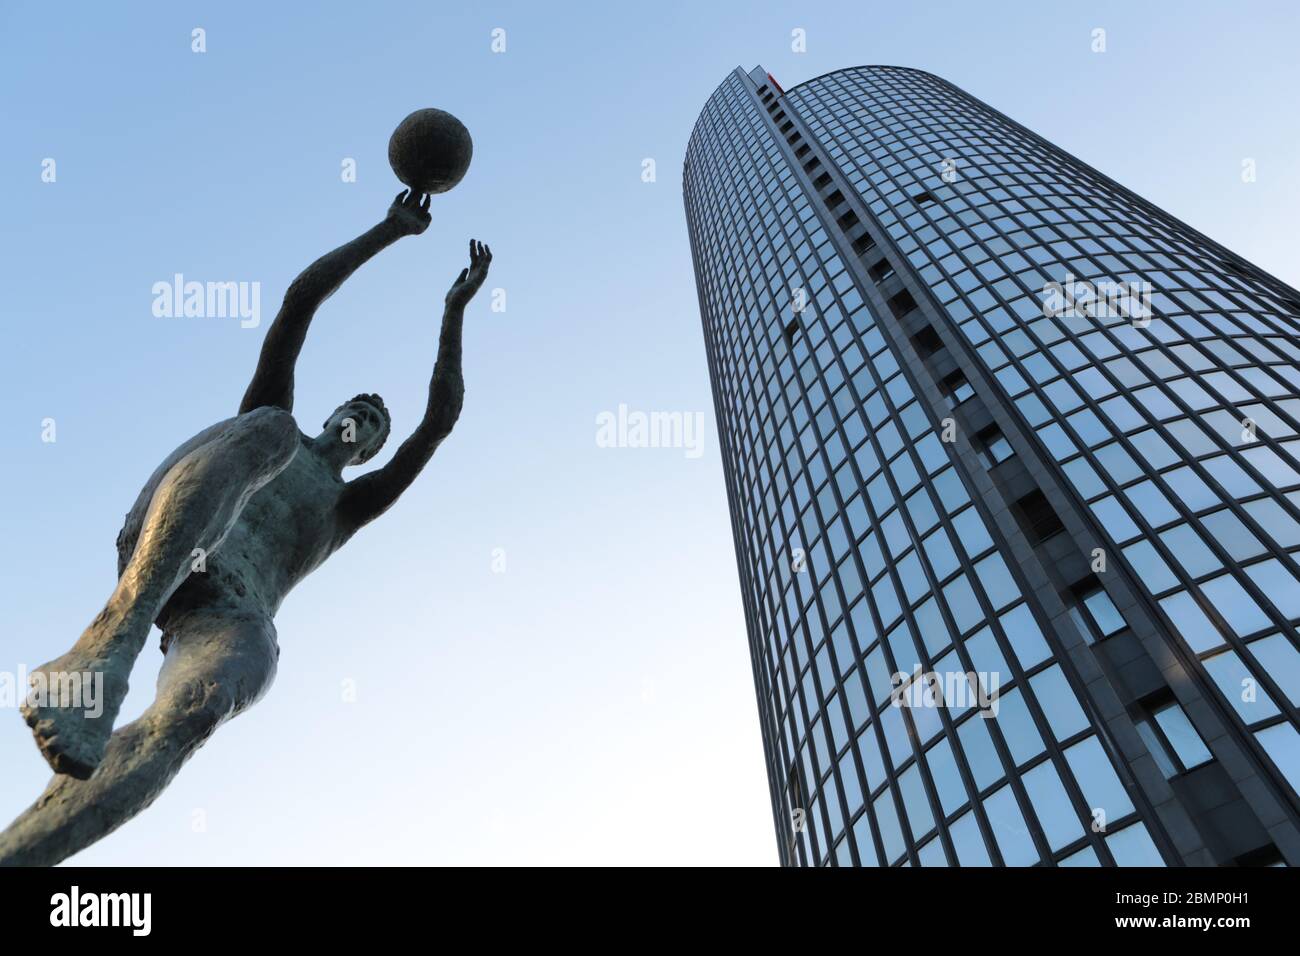 Monument of a famous Croatian basketball player Drazen Petrovic and Cibona business tower in Zagreb Stock Photo